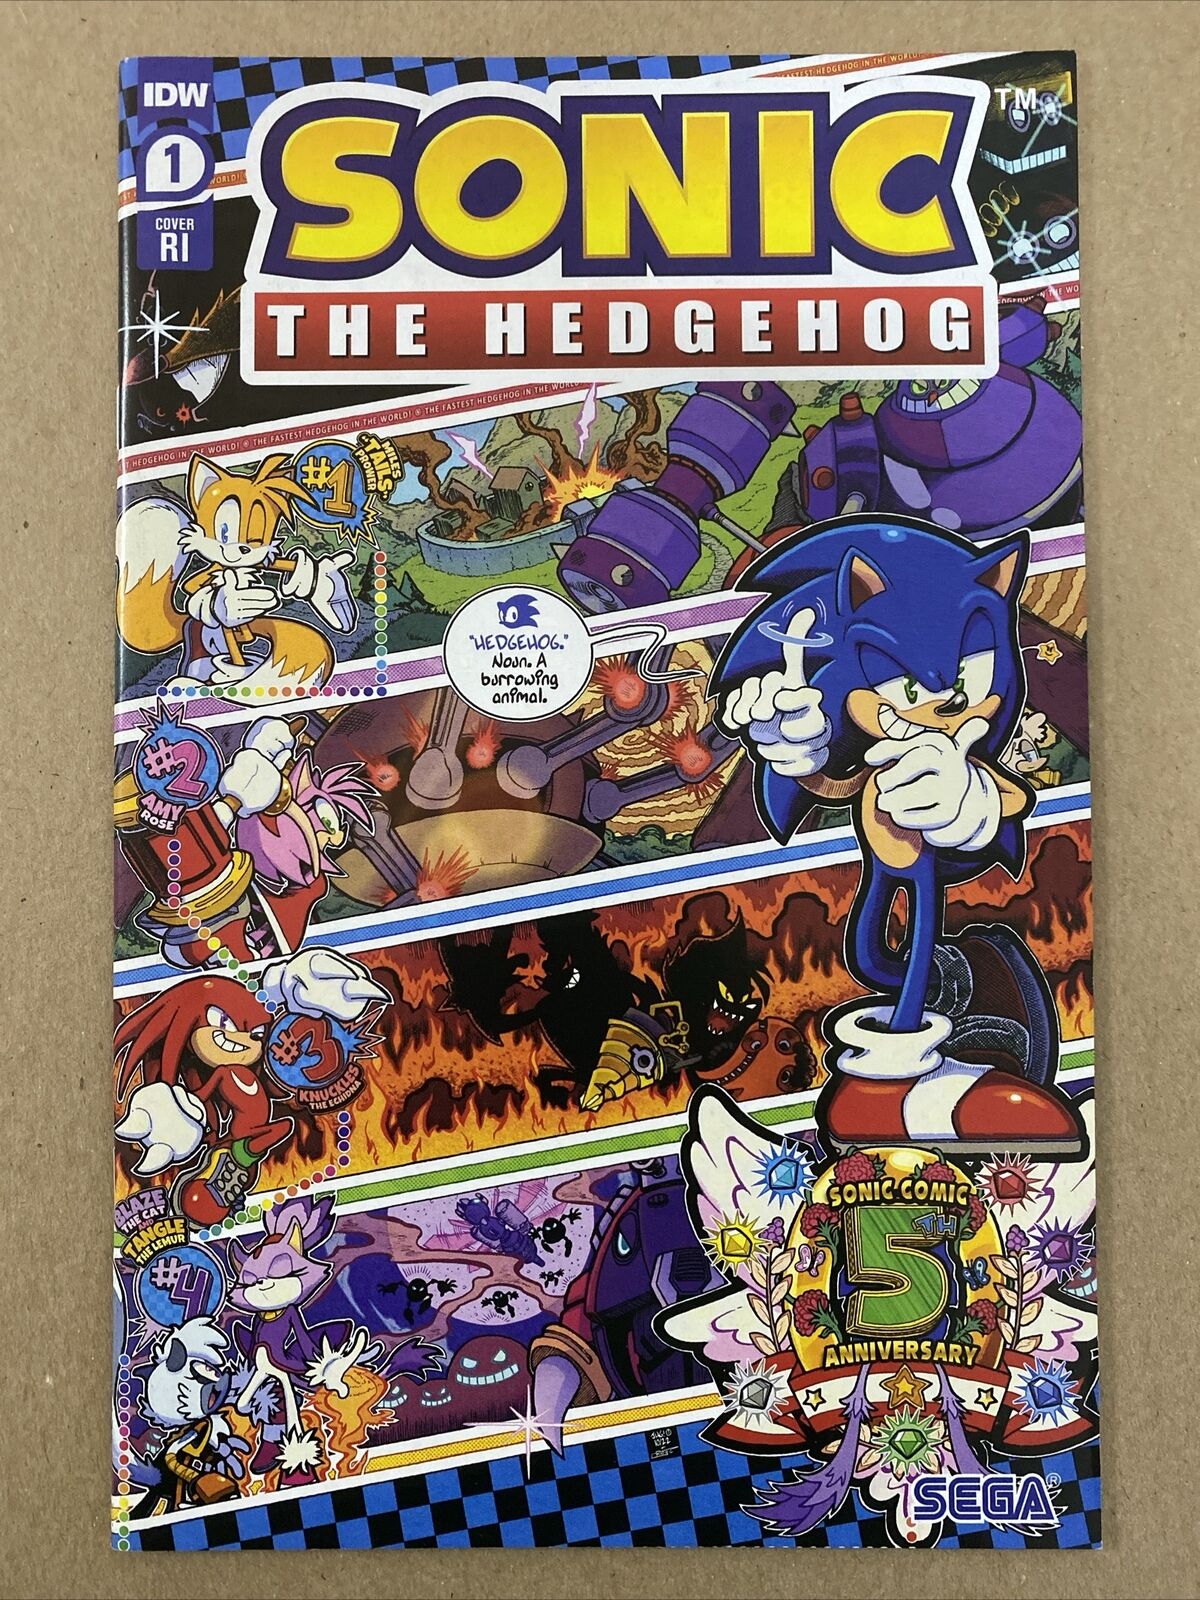 SONIC THE HEDGEHOG #1 5th Anniversary Edition (IDW 2023) 1:50 Variant * NM